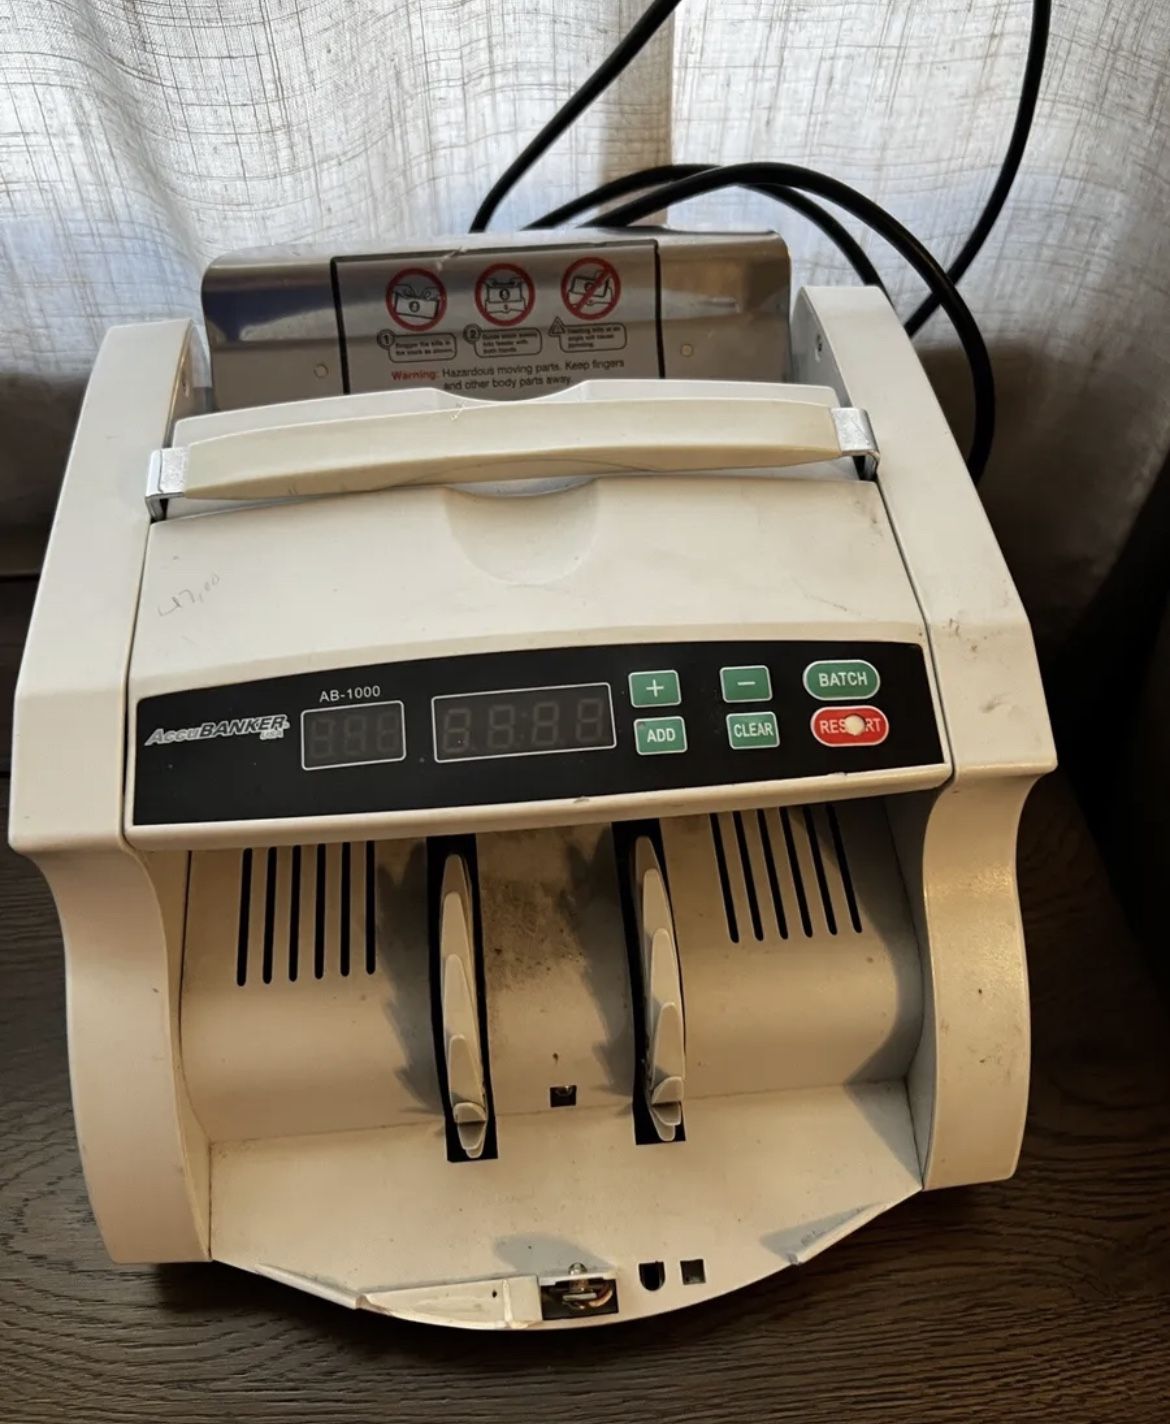 Money Counting Machine / Bill Counter Accubanker AB-1000